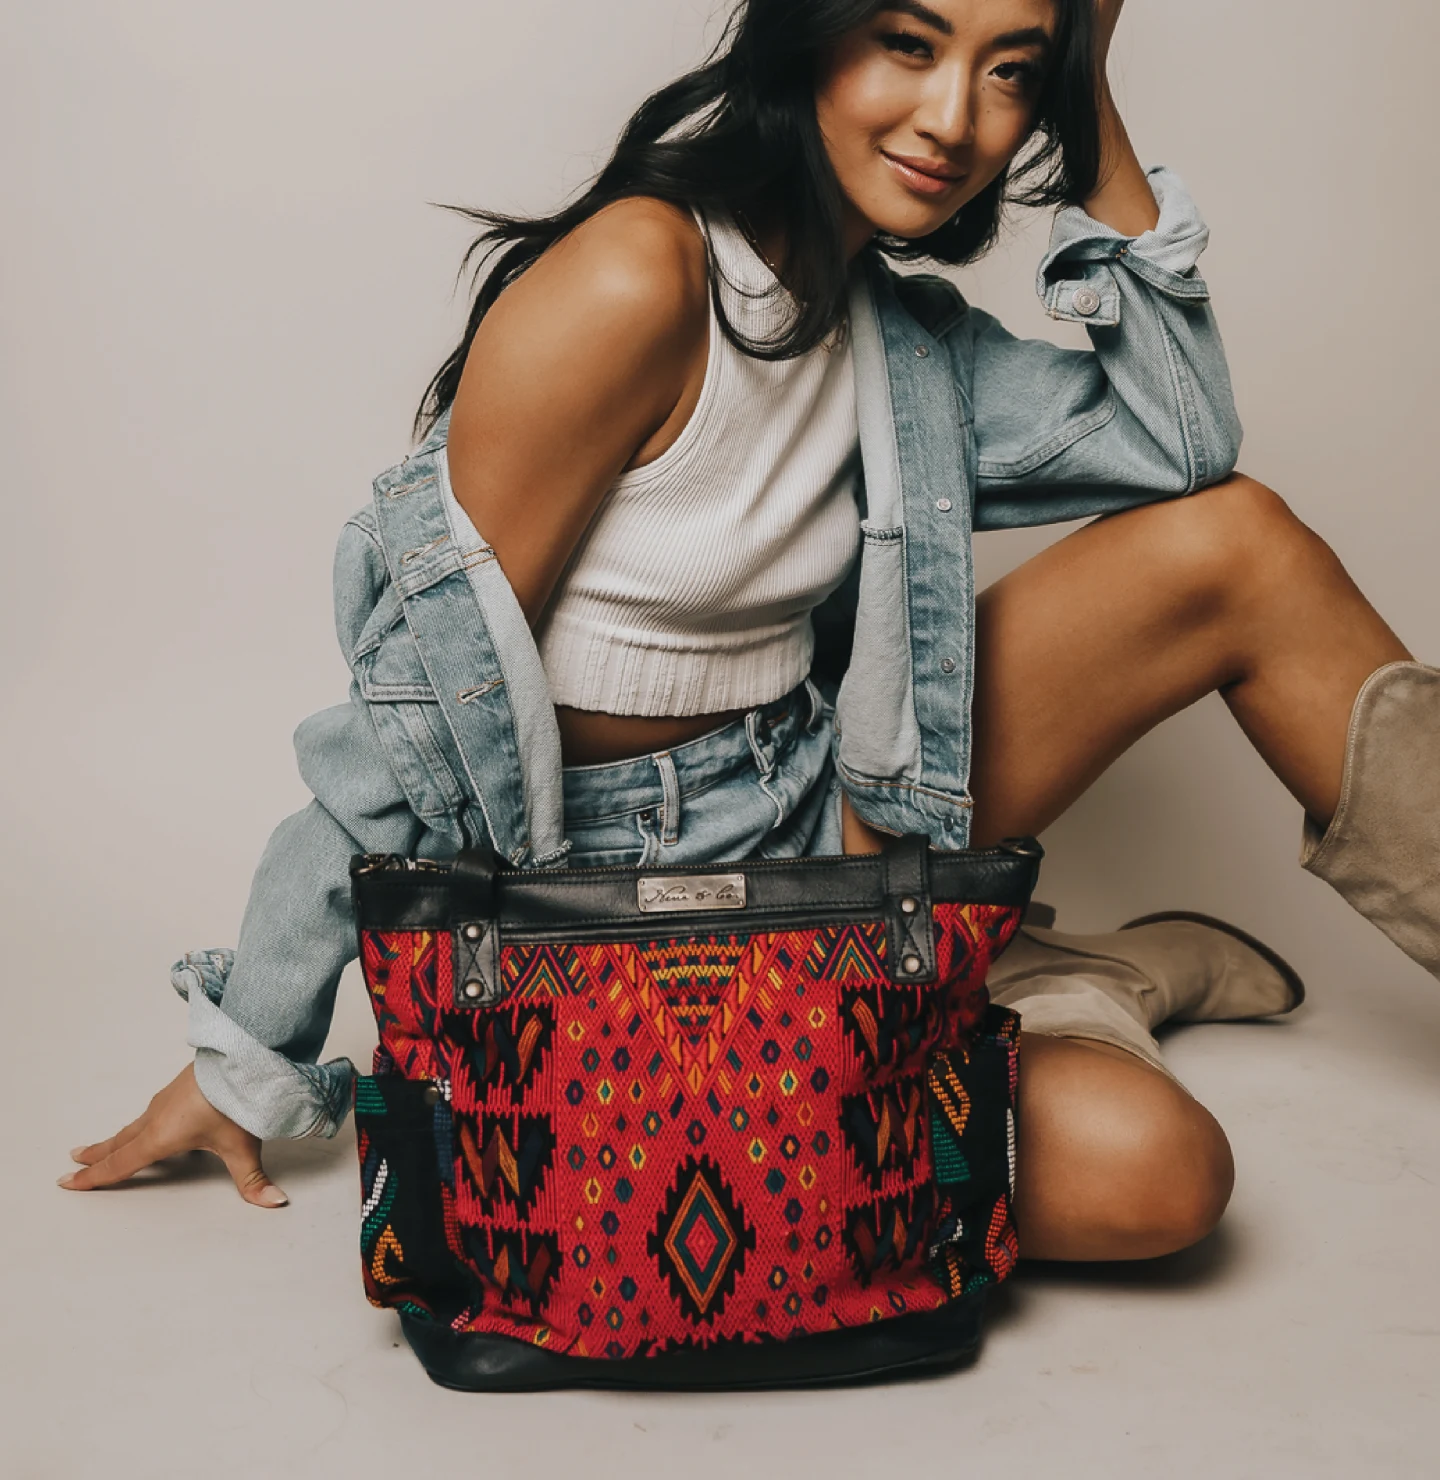 East Asian female model in white knitted tank top, jean jacket and jean skirt sits and smiles behind a red Nena & Co. handbag